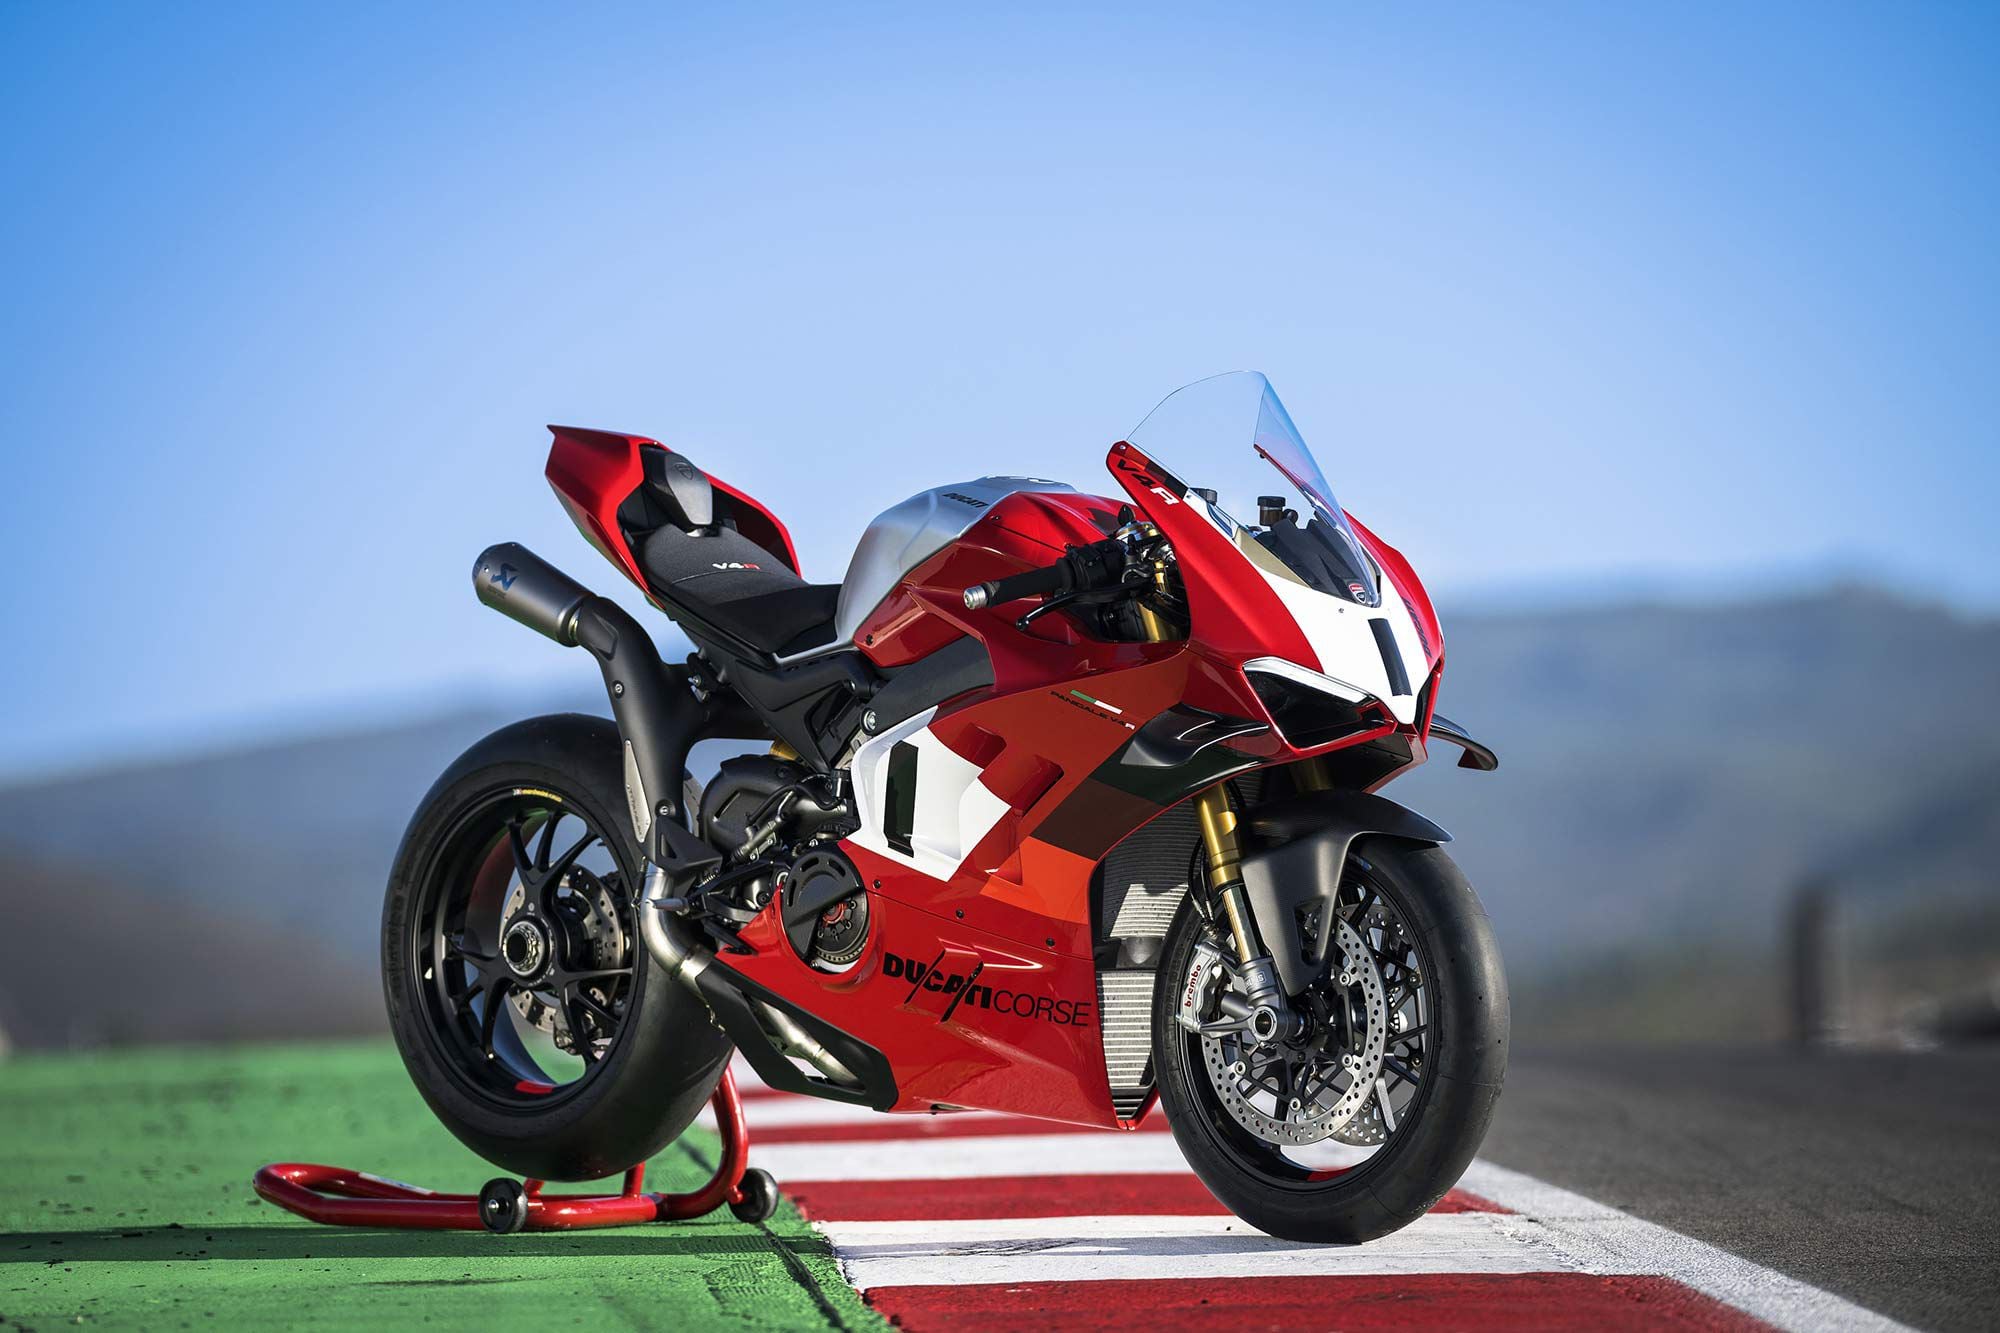 Ducati’s 2023 Panigale V4 R is a top contender for the most impressive superbike coming to market in 2023.